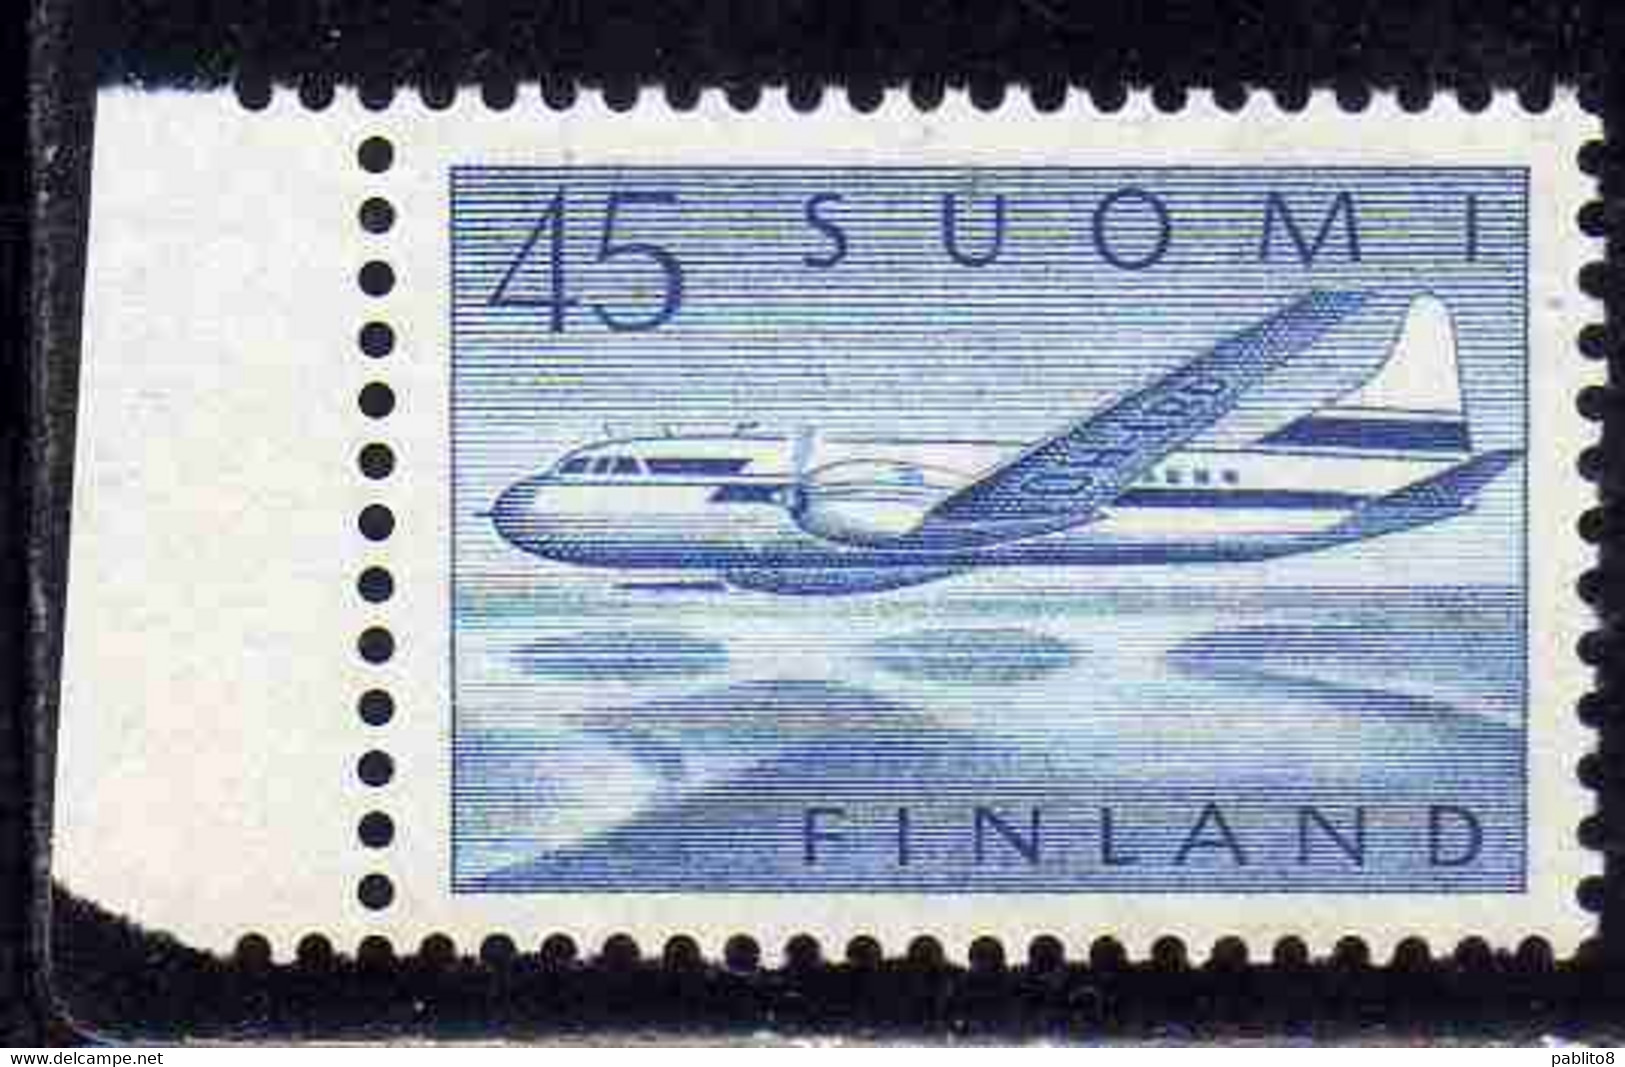 SUOMI FINLAND FINLANDIA FINLANDE 1958 AIR POST MAIL AIRMAIL CONVAIR OVER LAKES 34m MNH - Unused Stamps